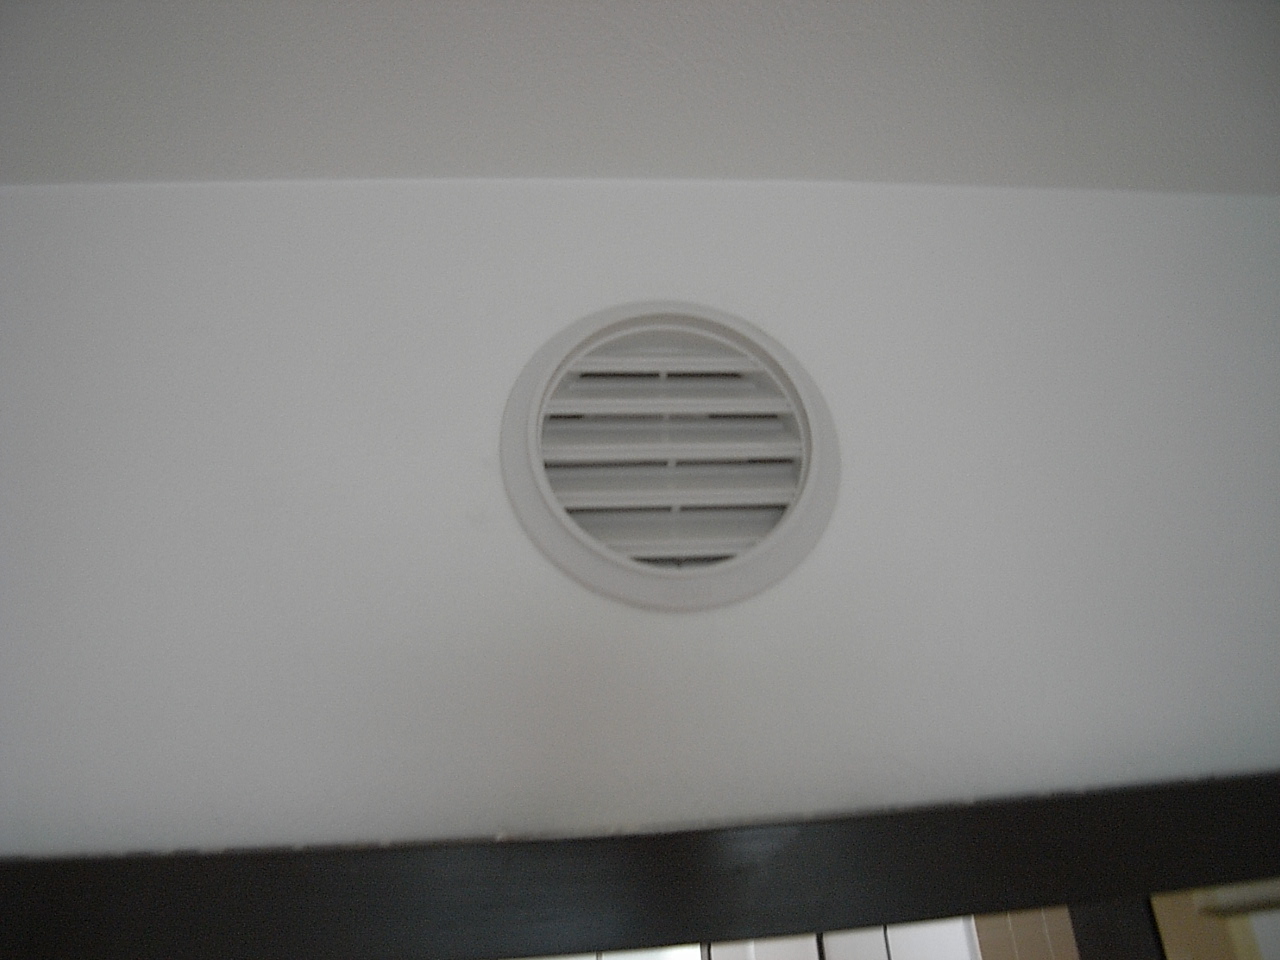 Other. It is a ventilation opening